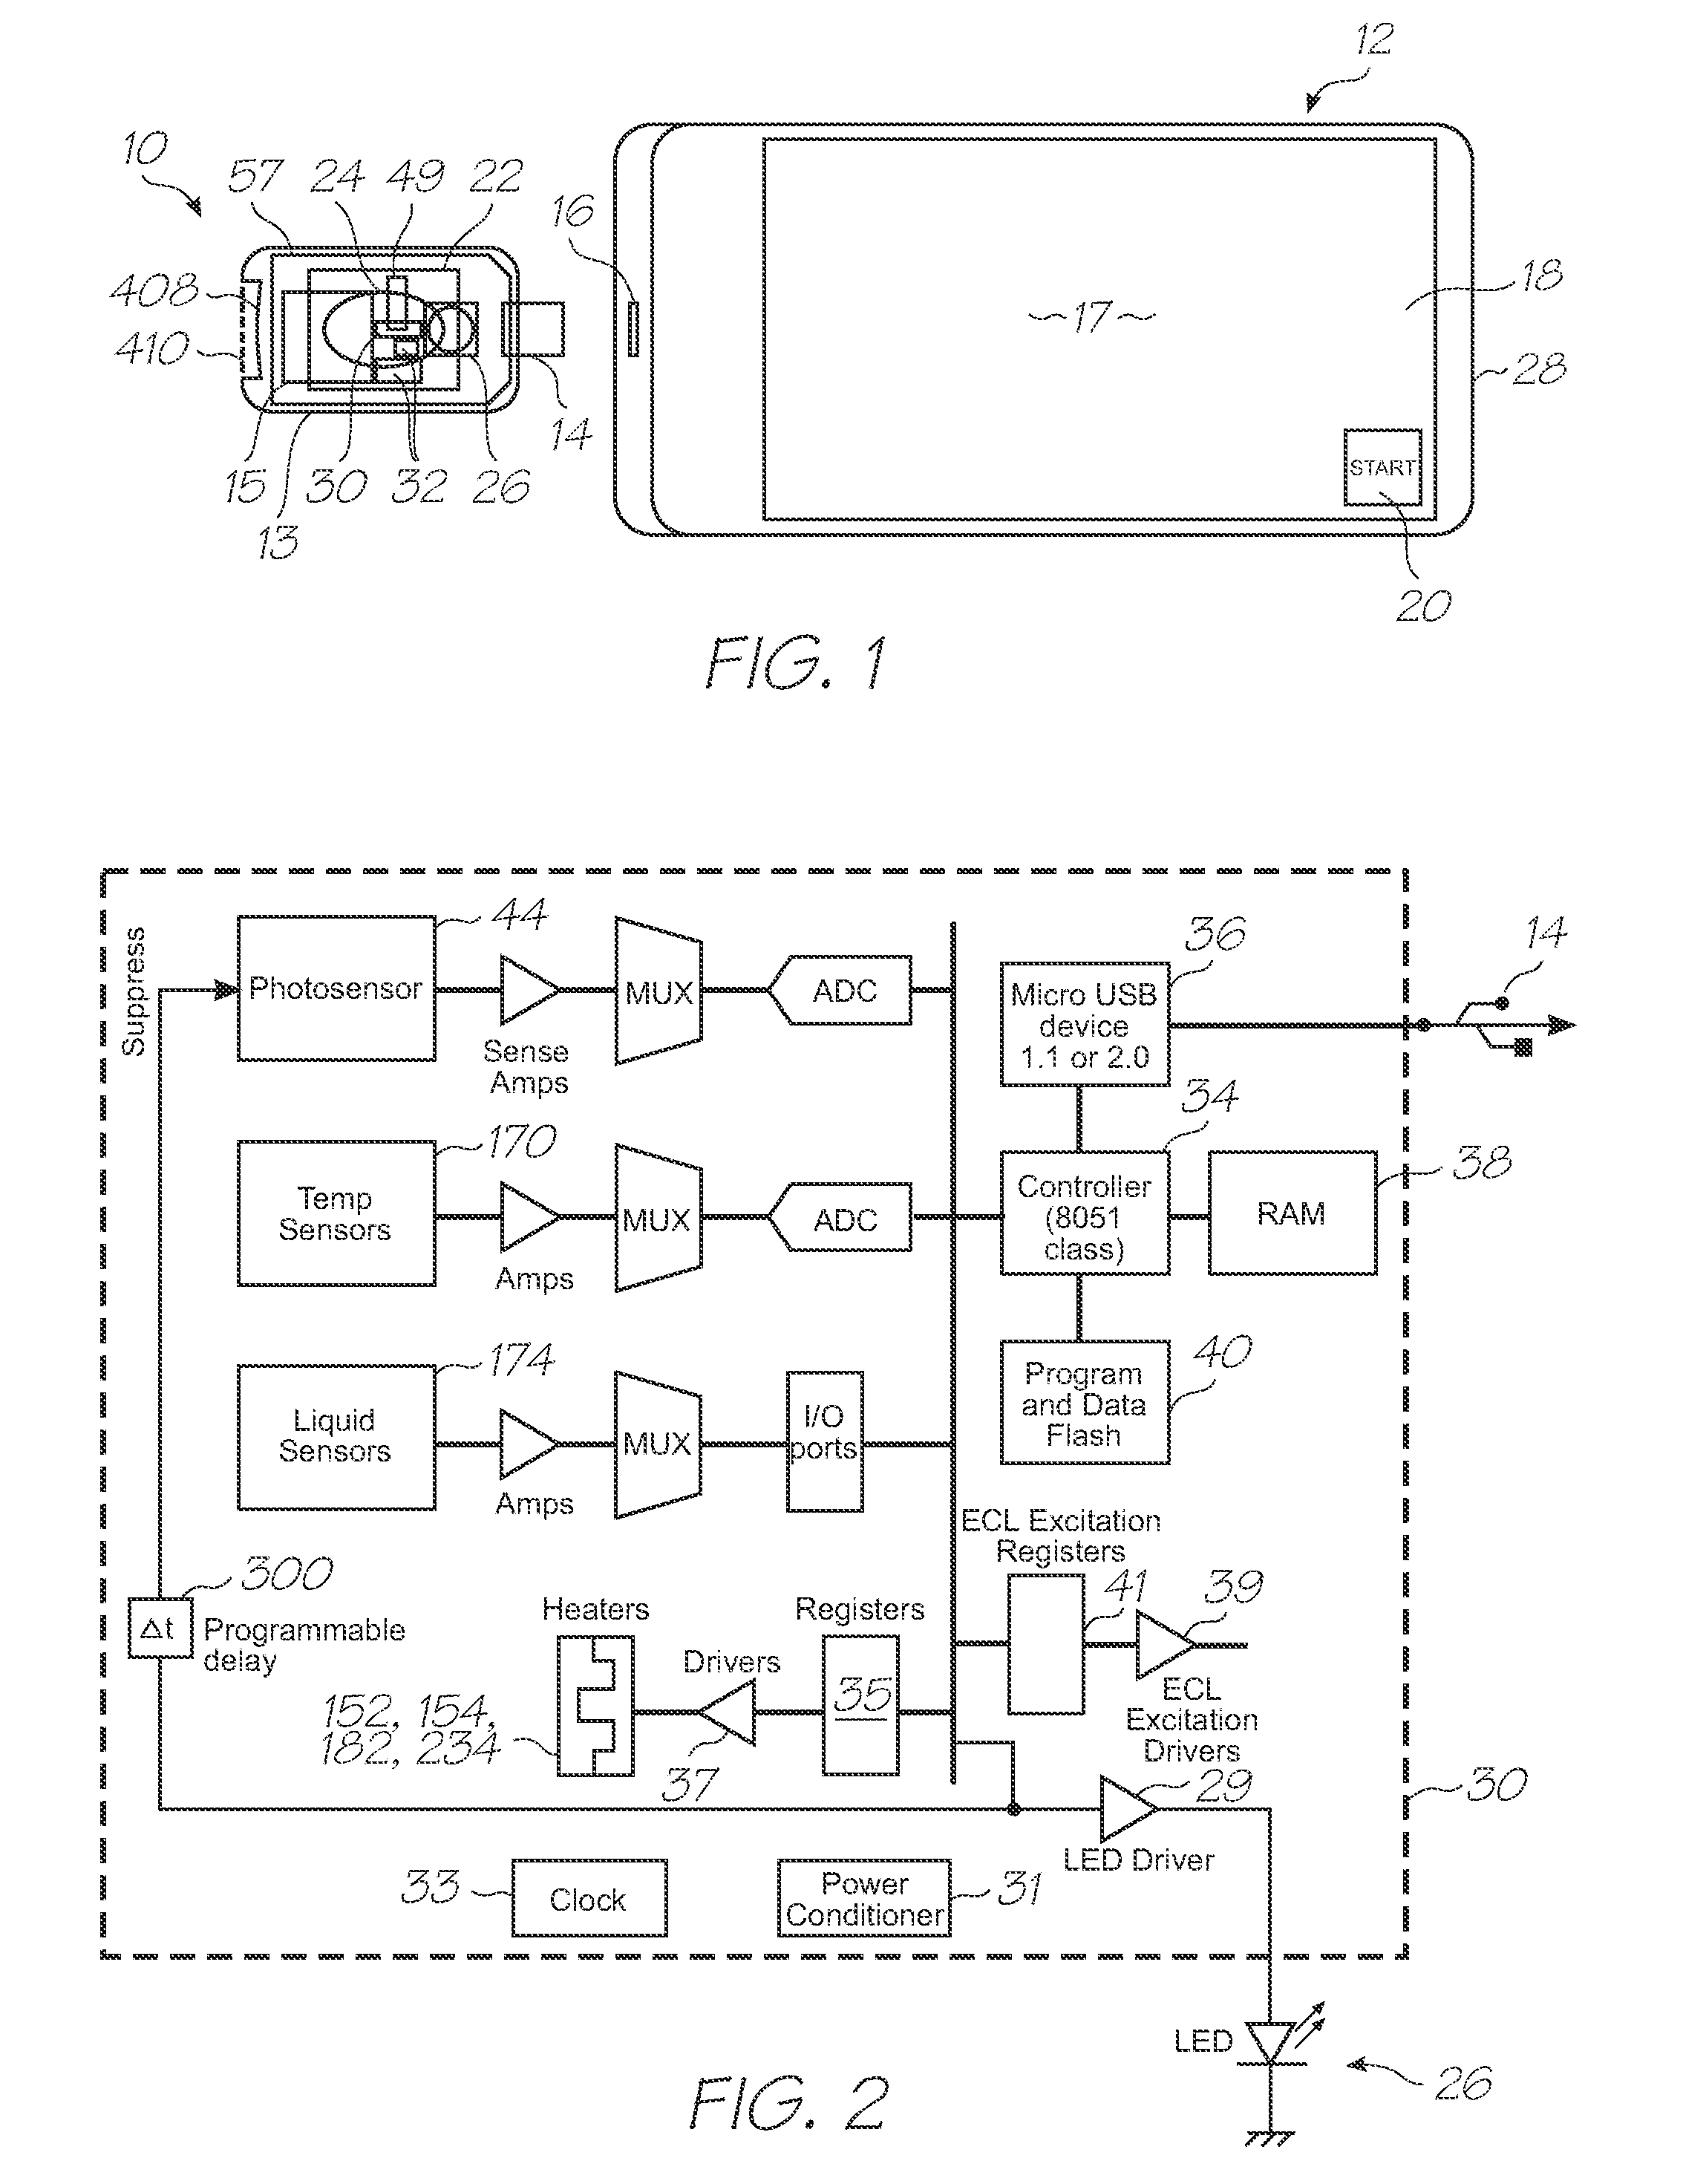 Loc device for amplifying and detecting target nucleic acid sequences using electrochemiluminescent resonant energy transfer, stem-and-loop probes with covalently attached primers